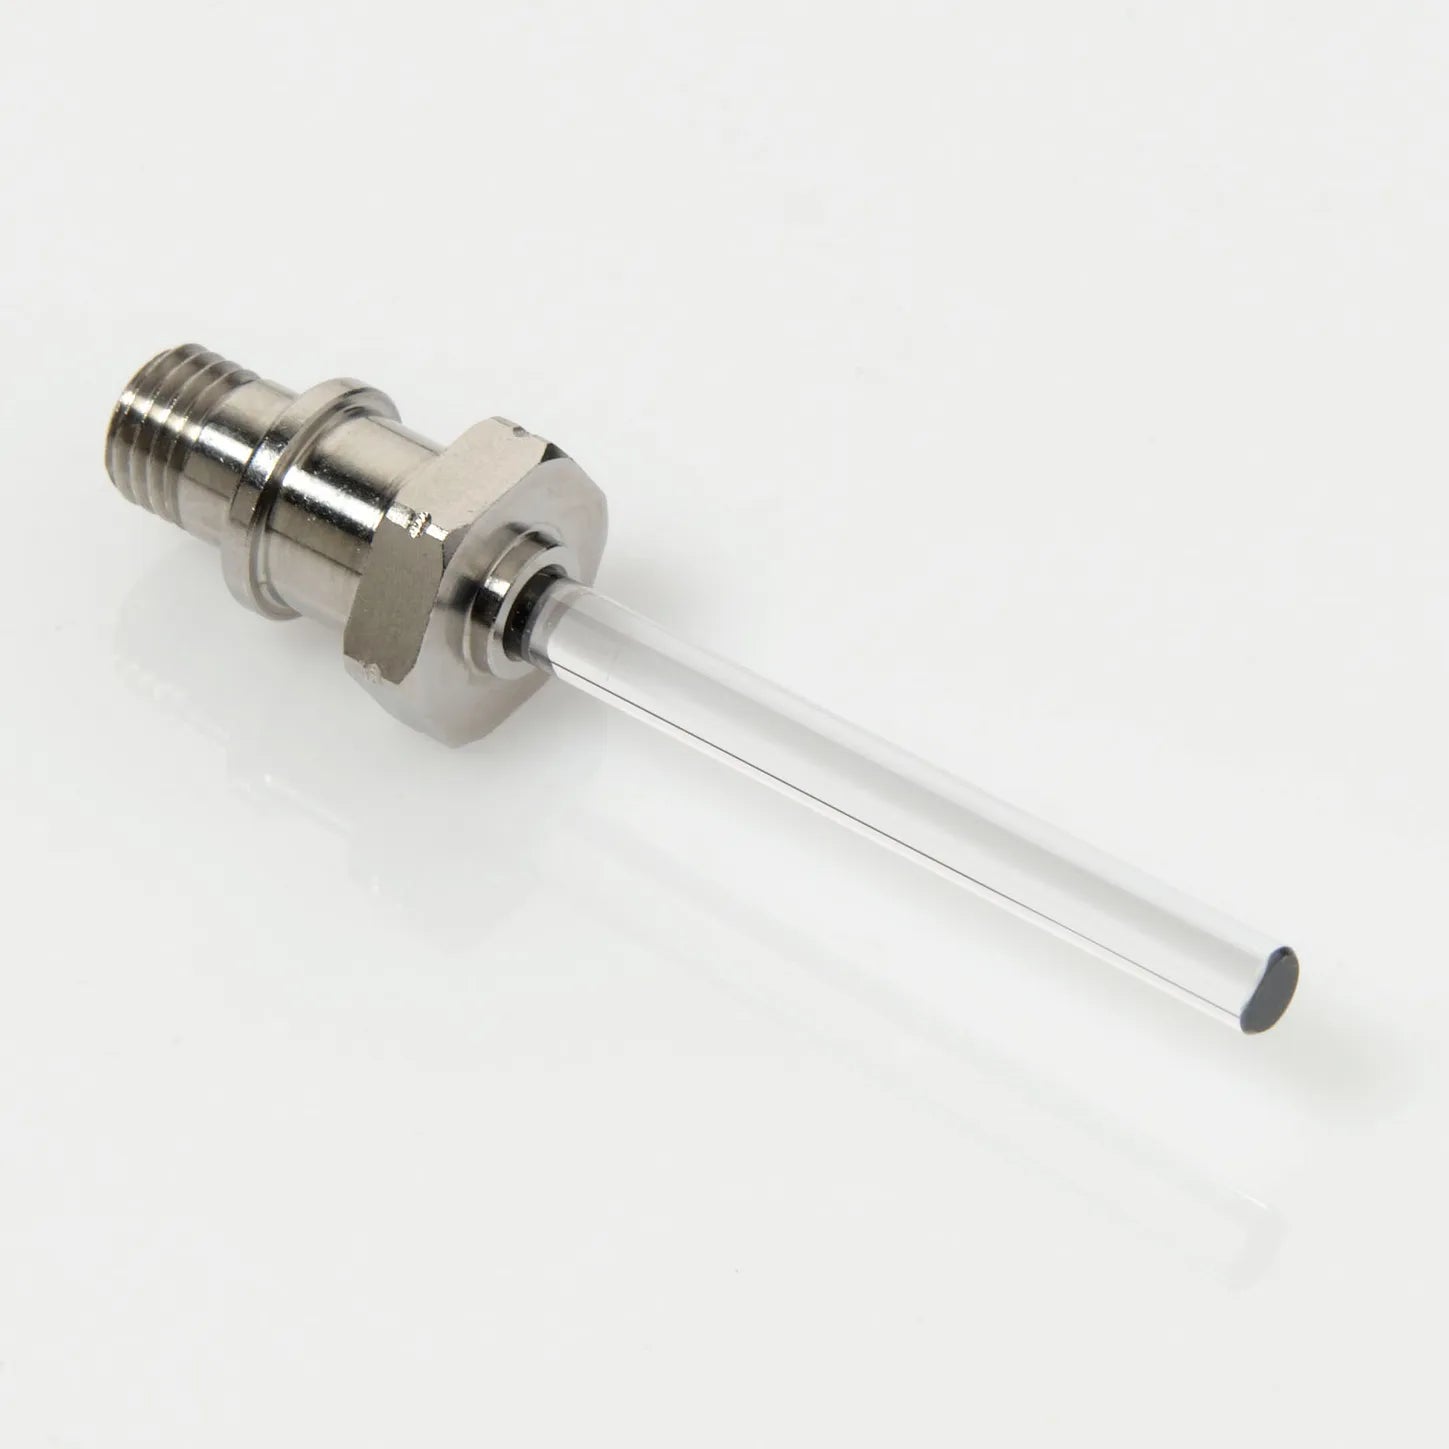 Sapphire Plunger, Comparable to Shimadzu # 228-35009-93